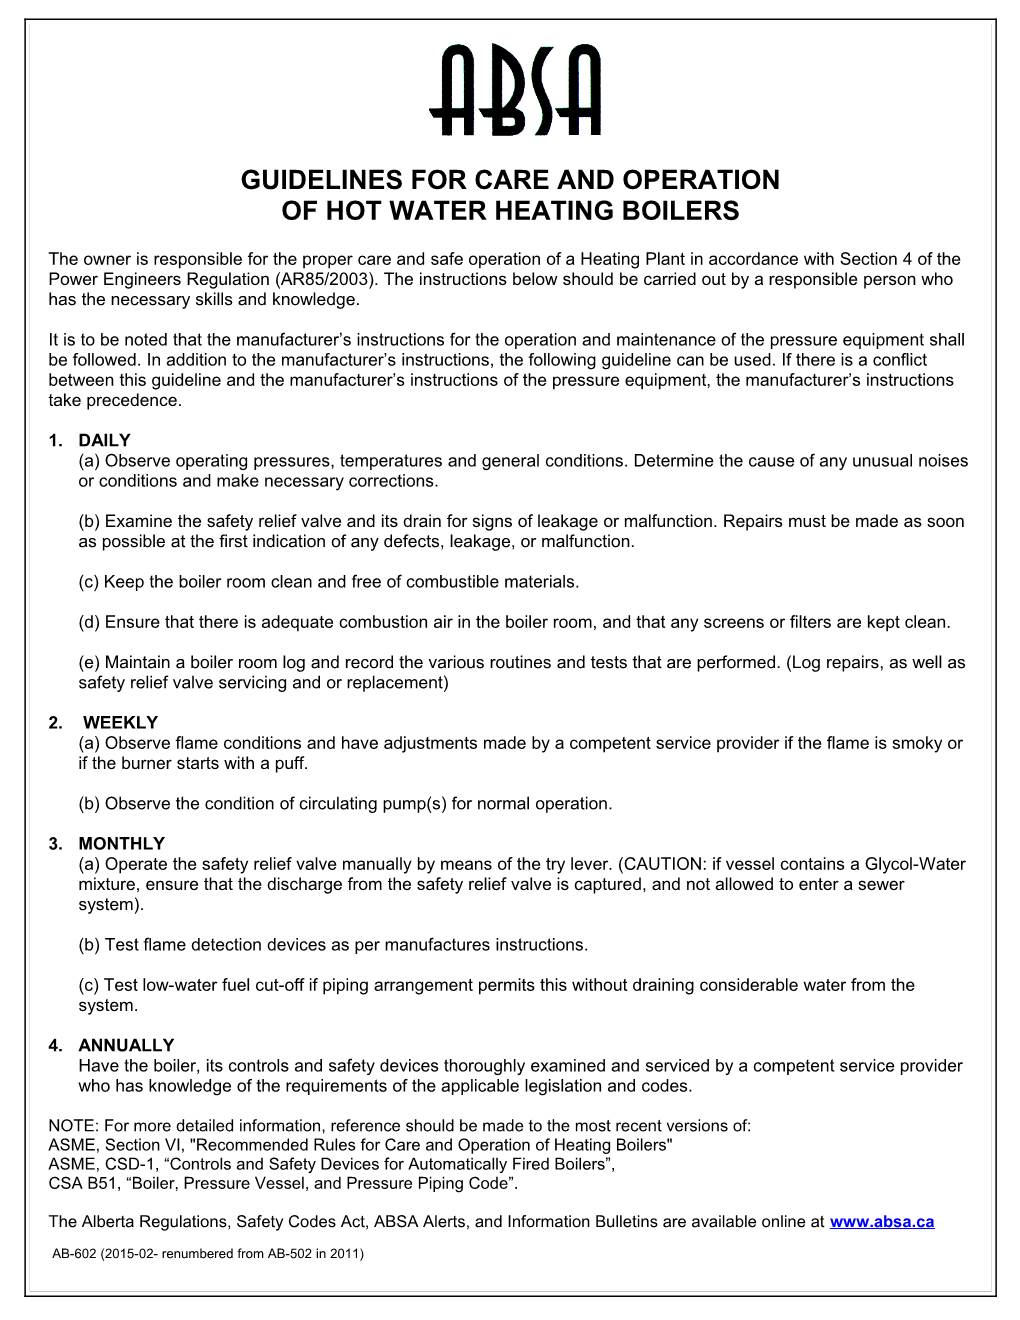 AB-602 Guidelines for Care and Operation of Steam/Hot Water Heating Boilers (D0000001).PDF